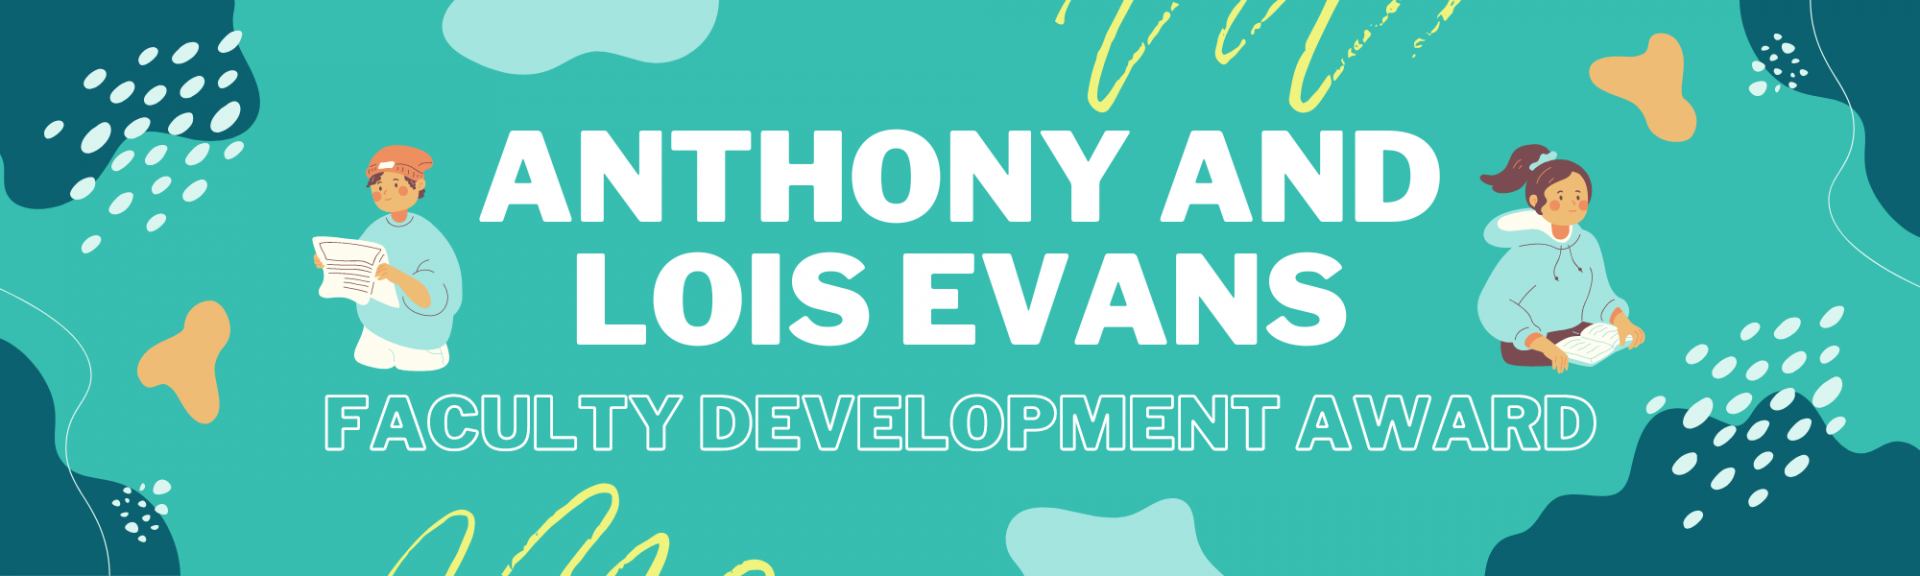 Anthony and Lois Evan Award Banner